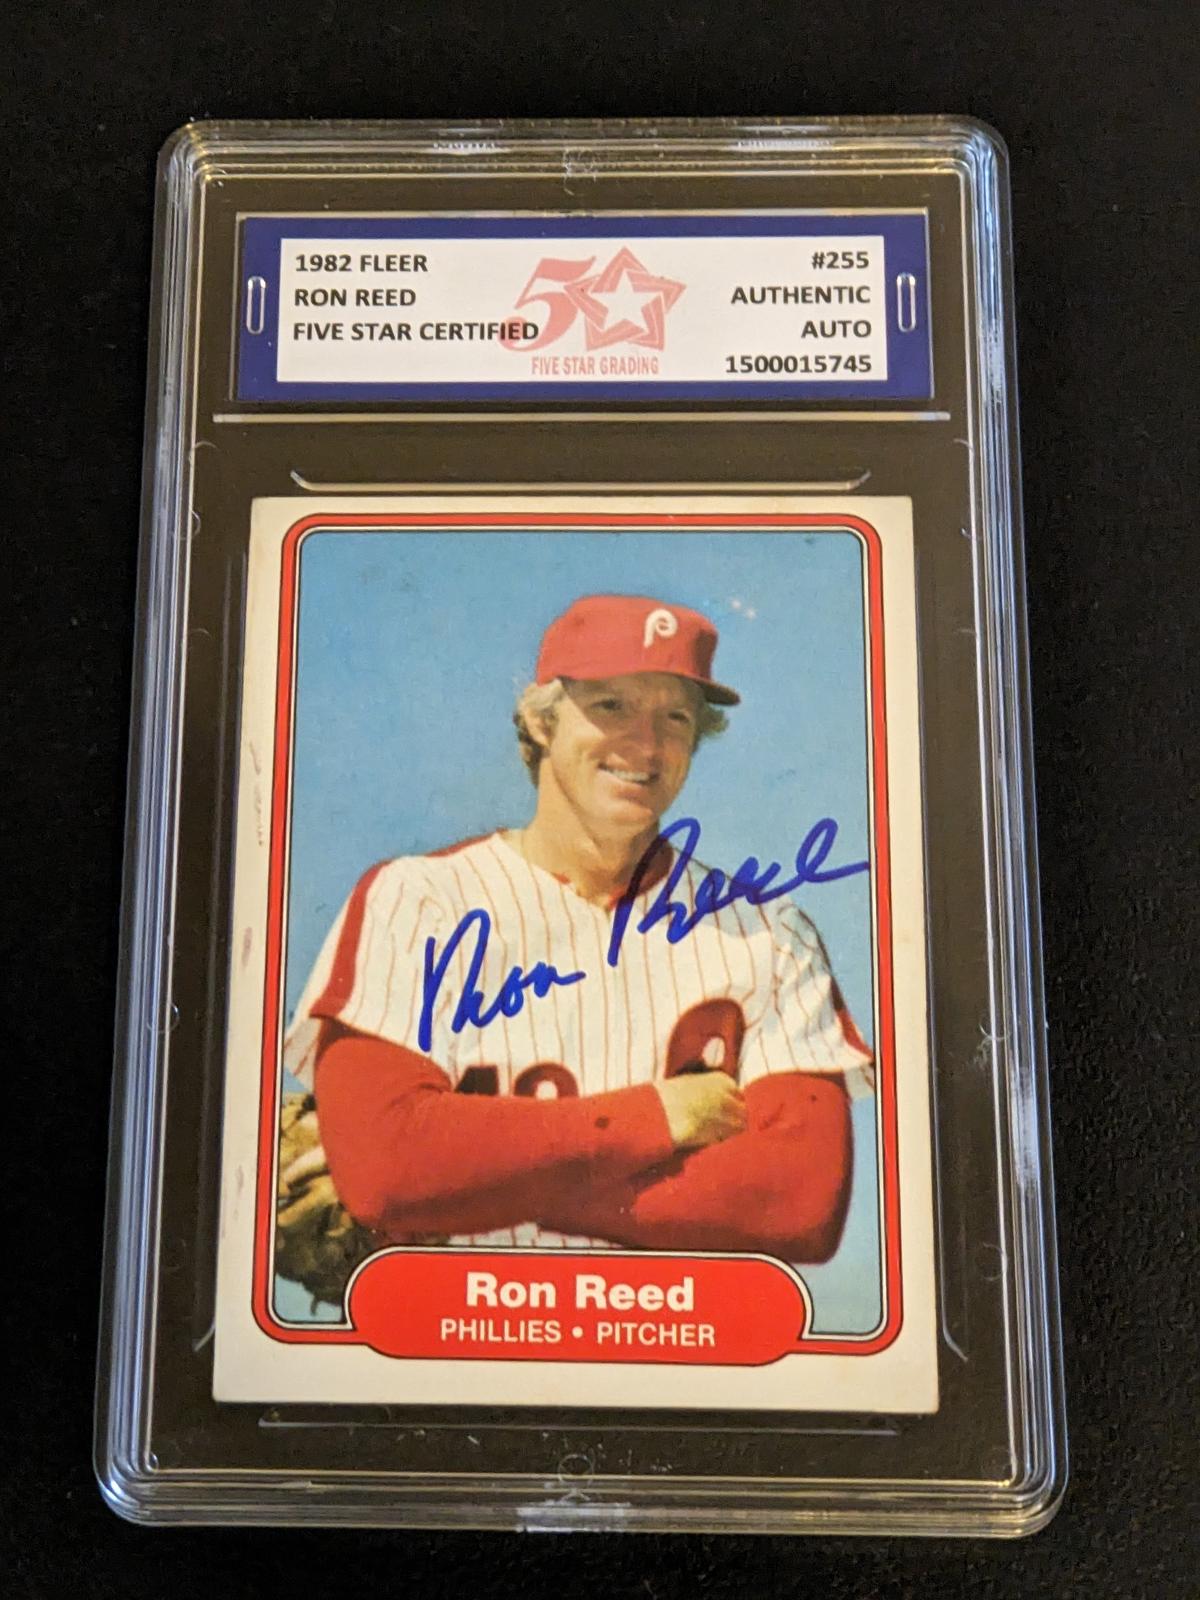 Ron Reed 1982 Fleer auto Authenticated by Fivestar Grading